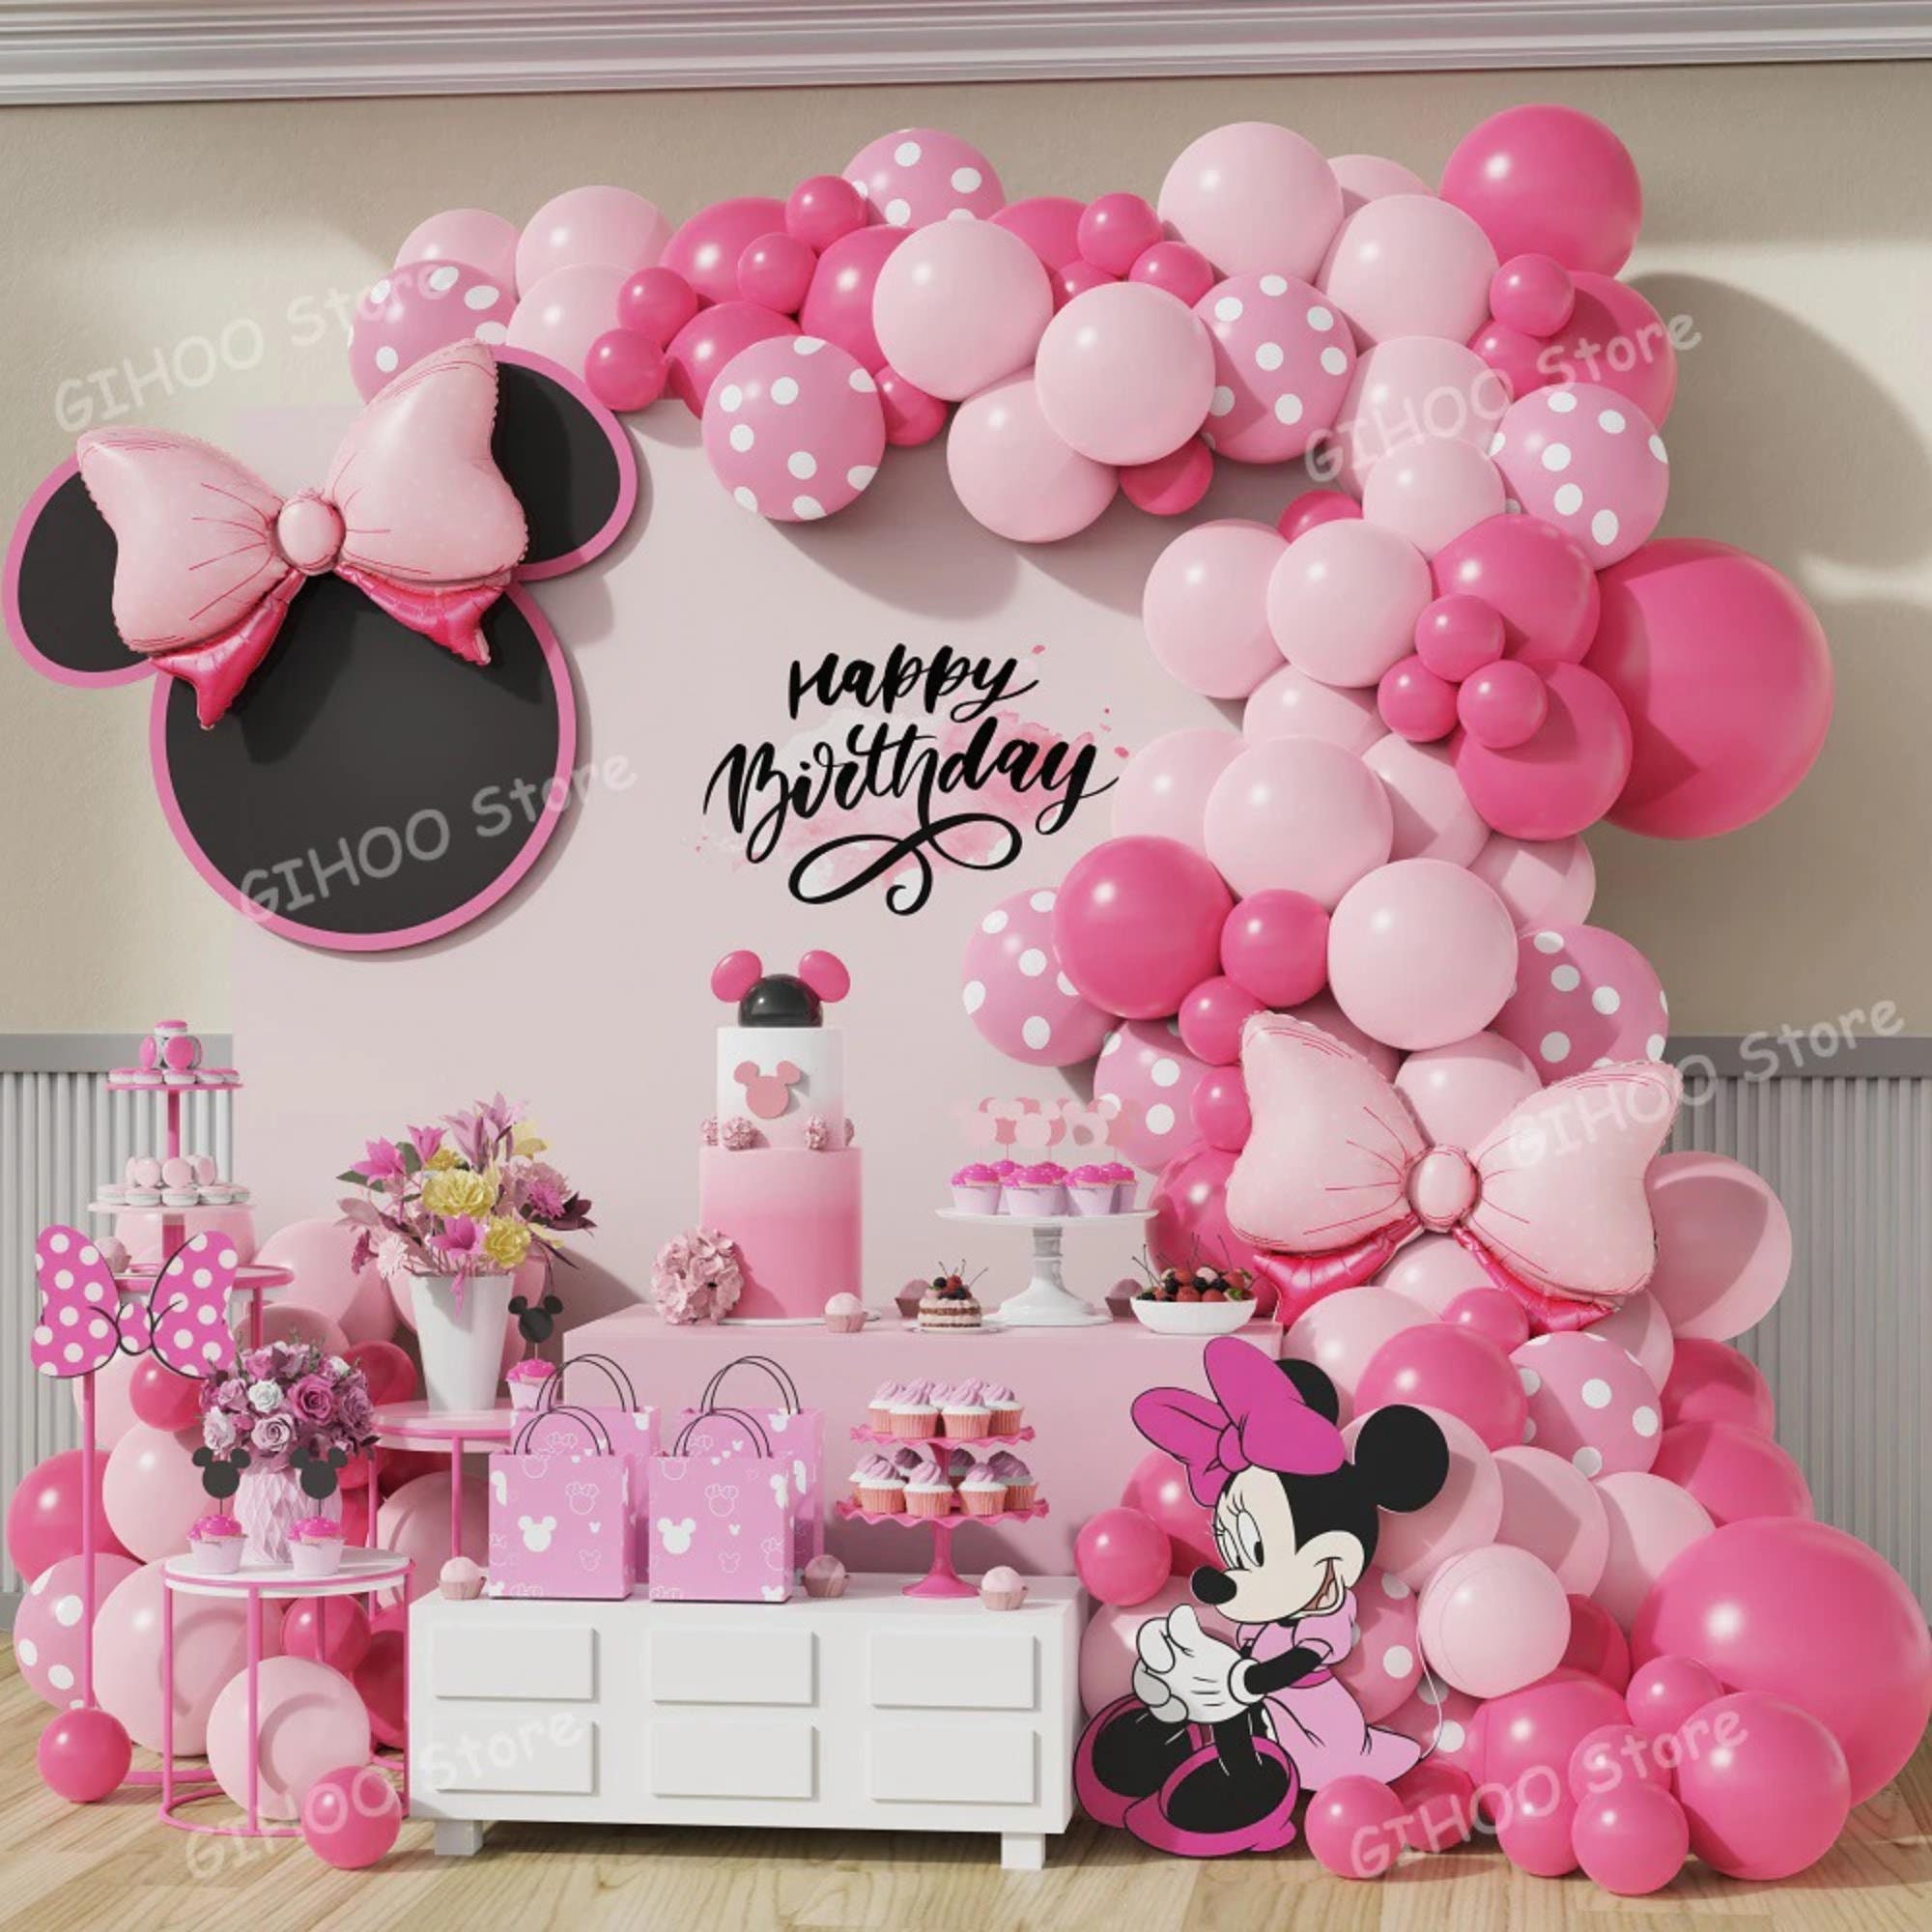 Ochooy Balloon Mickey The Mouse Birthday Party Decorations, Mickey Themed Party Supplies Set for Girl’s/Boy’s with Balloons Garland Kit, Mickey